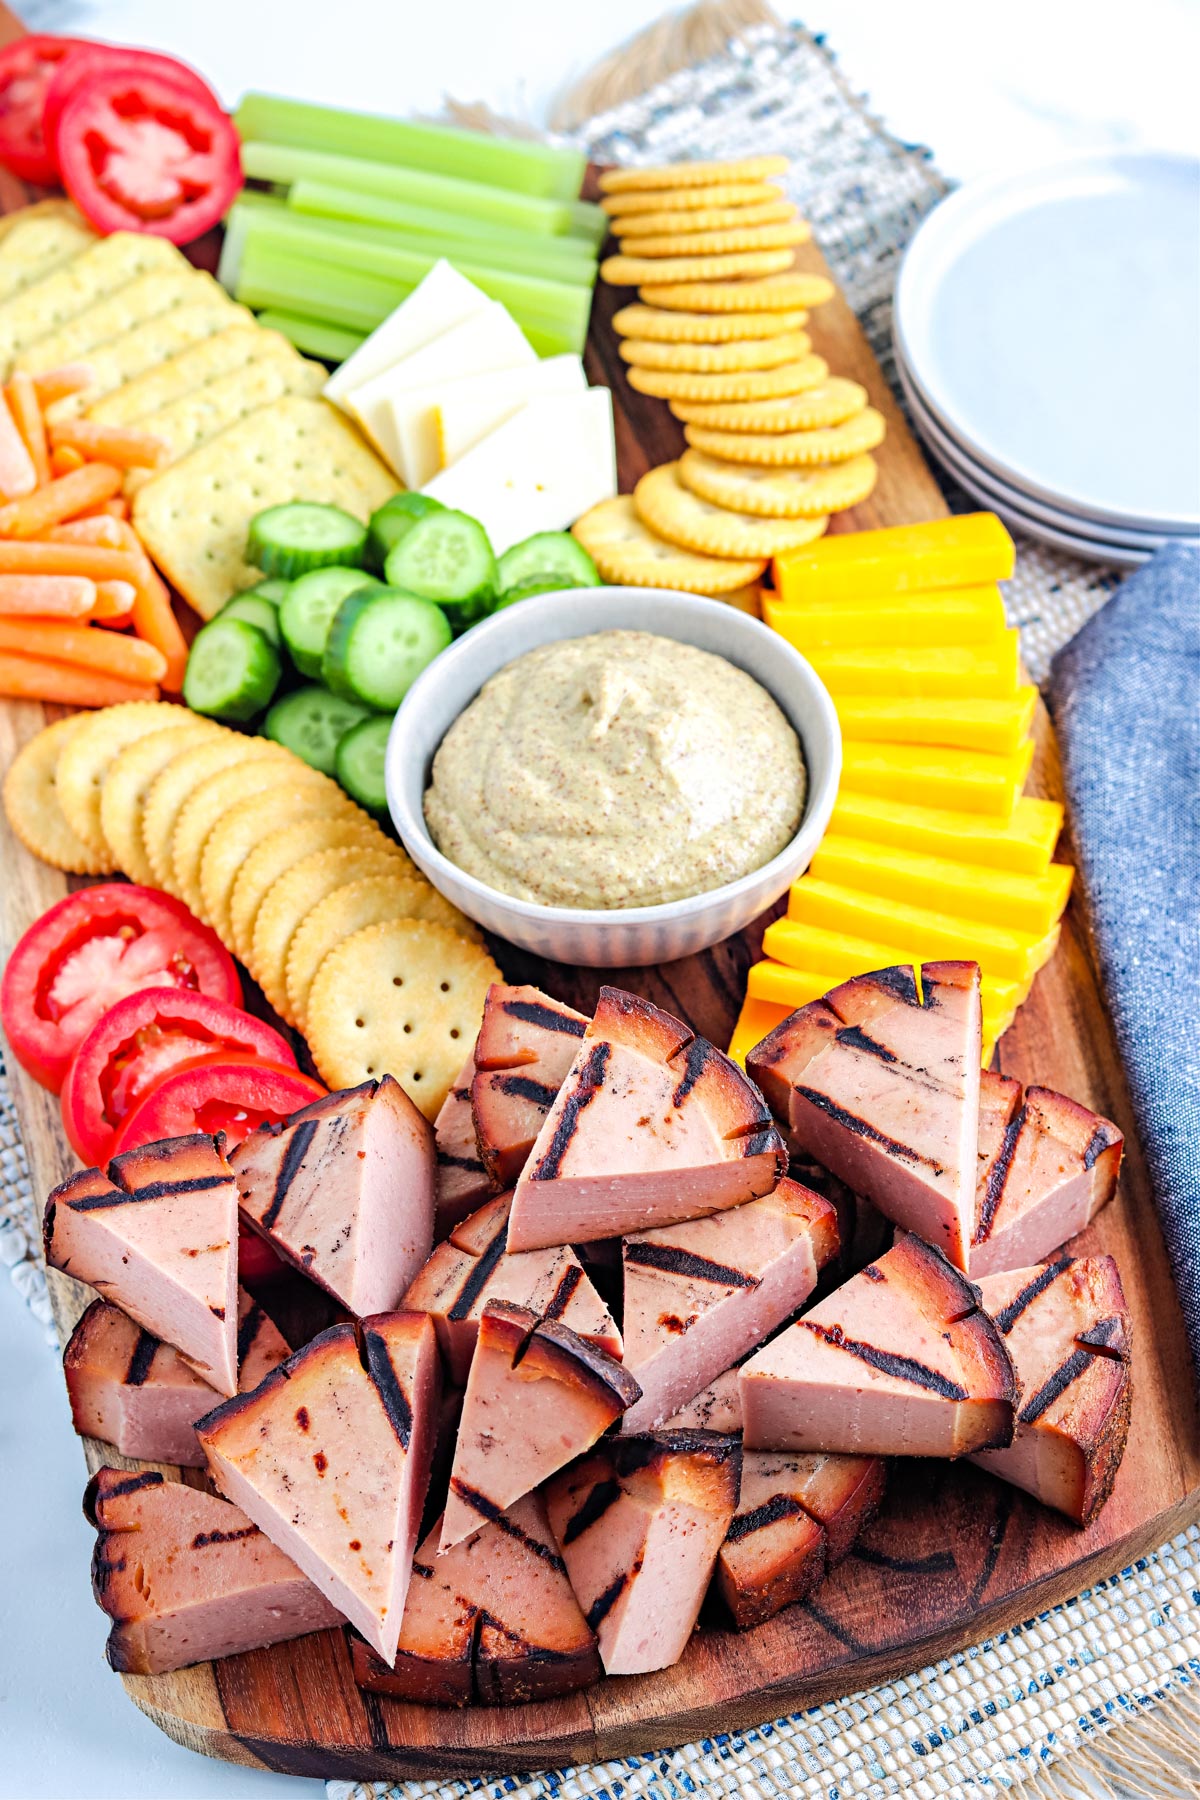 An overhead picture of a platter of the finished Smoke Bologna along with cheese, crackers, and sliced veggies on a wooden platter.